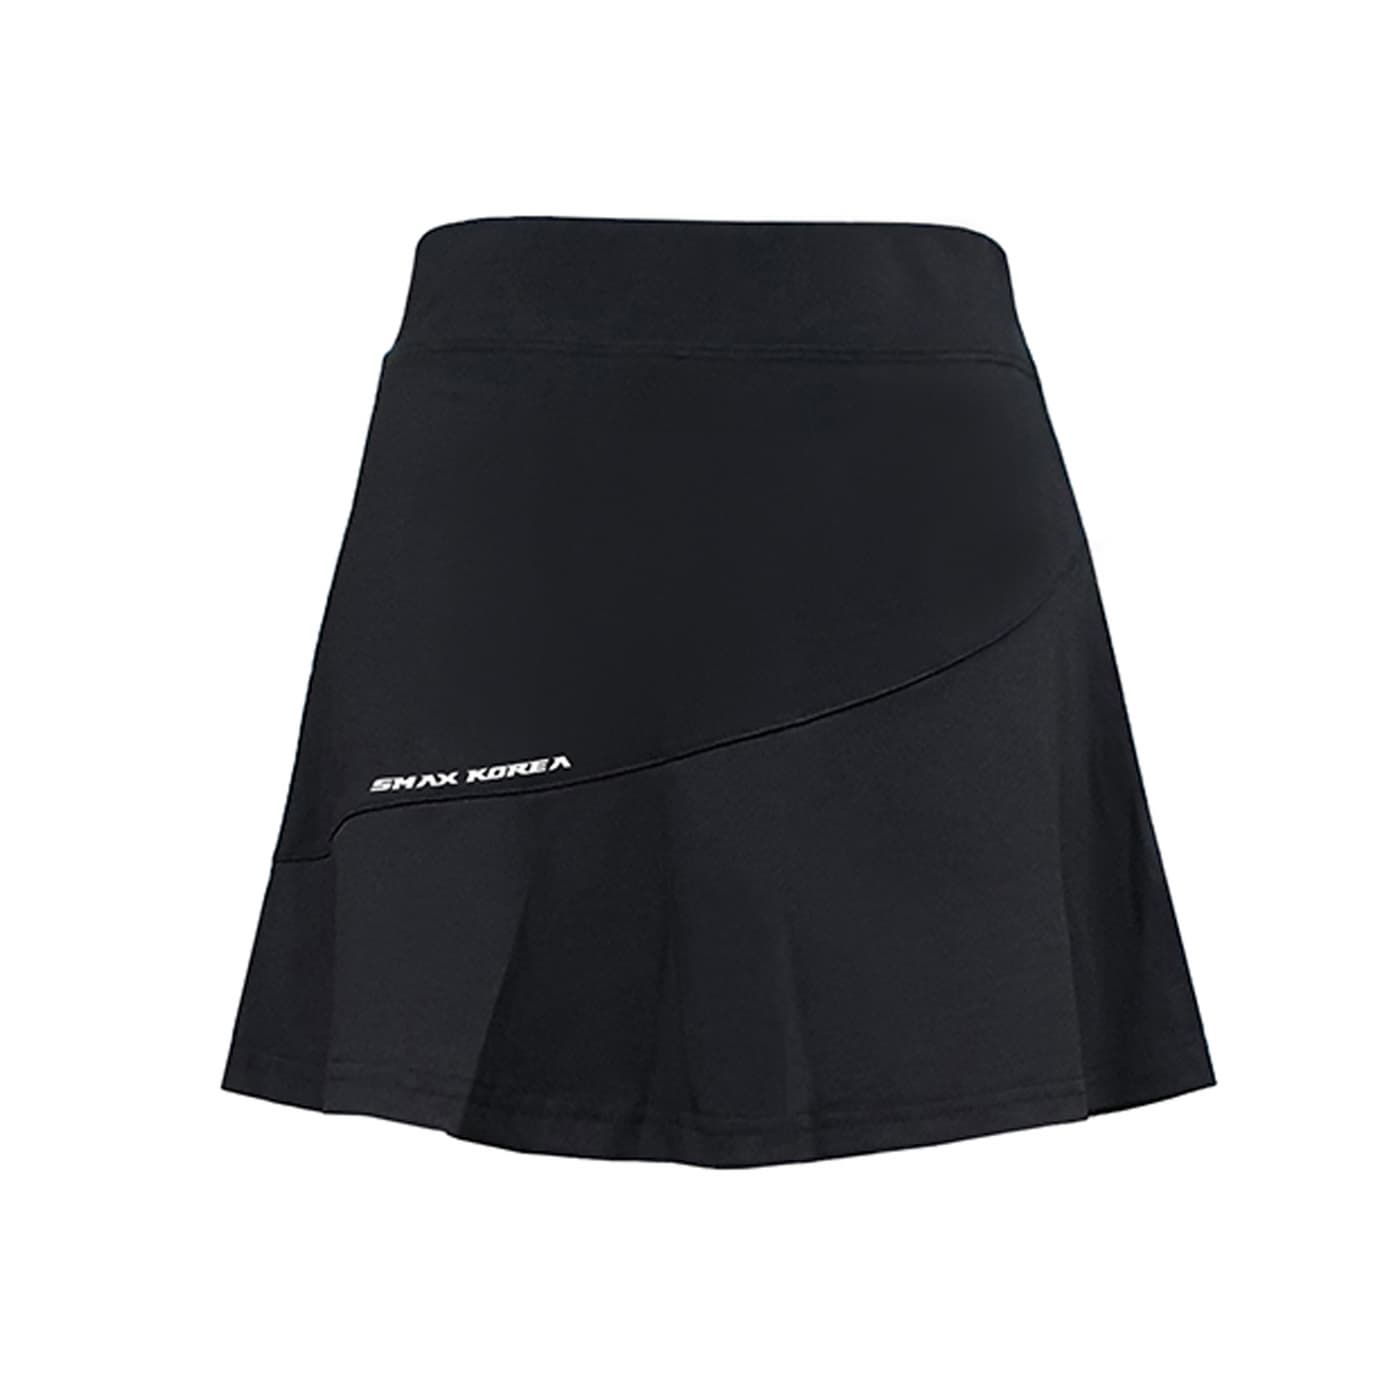 Badminton Skirt Made with Finest Spandex Fabric